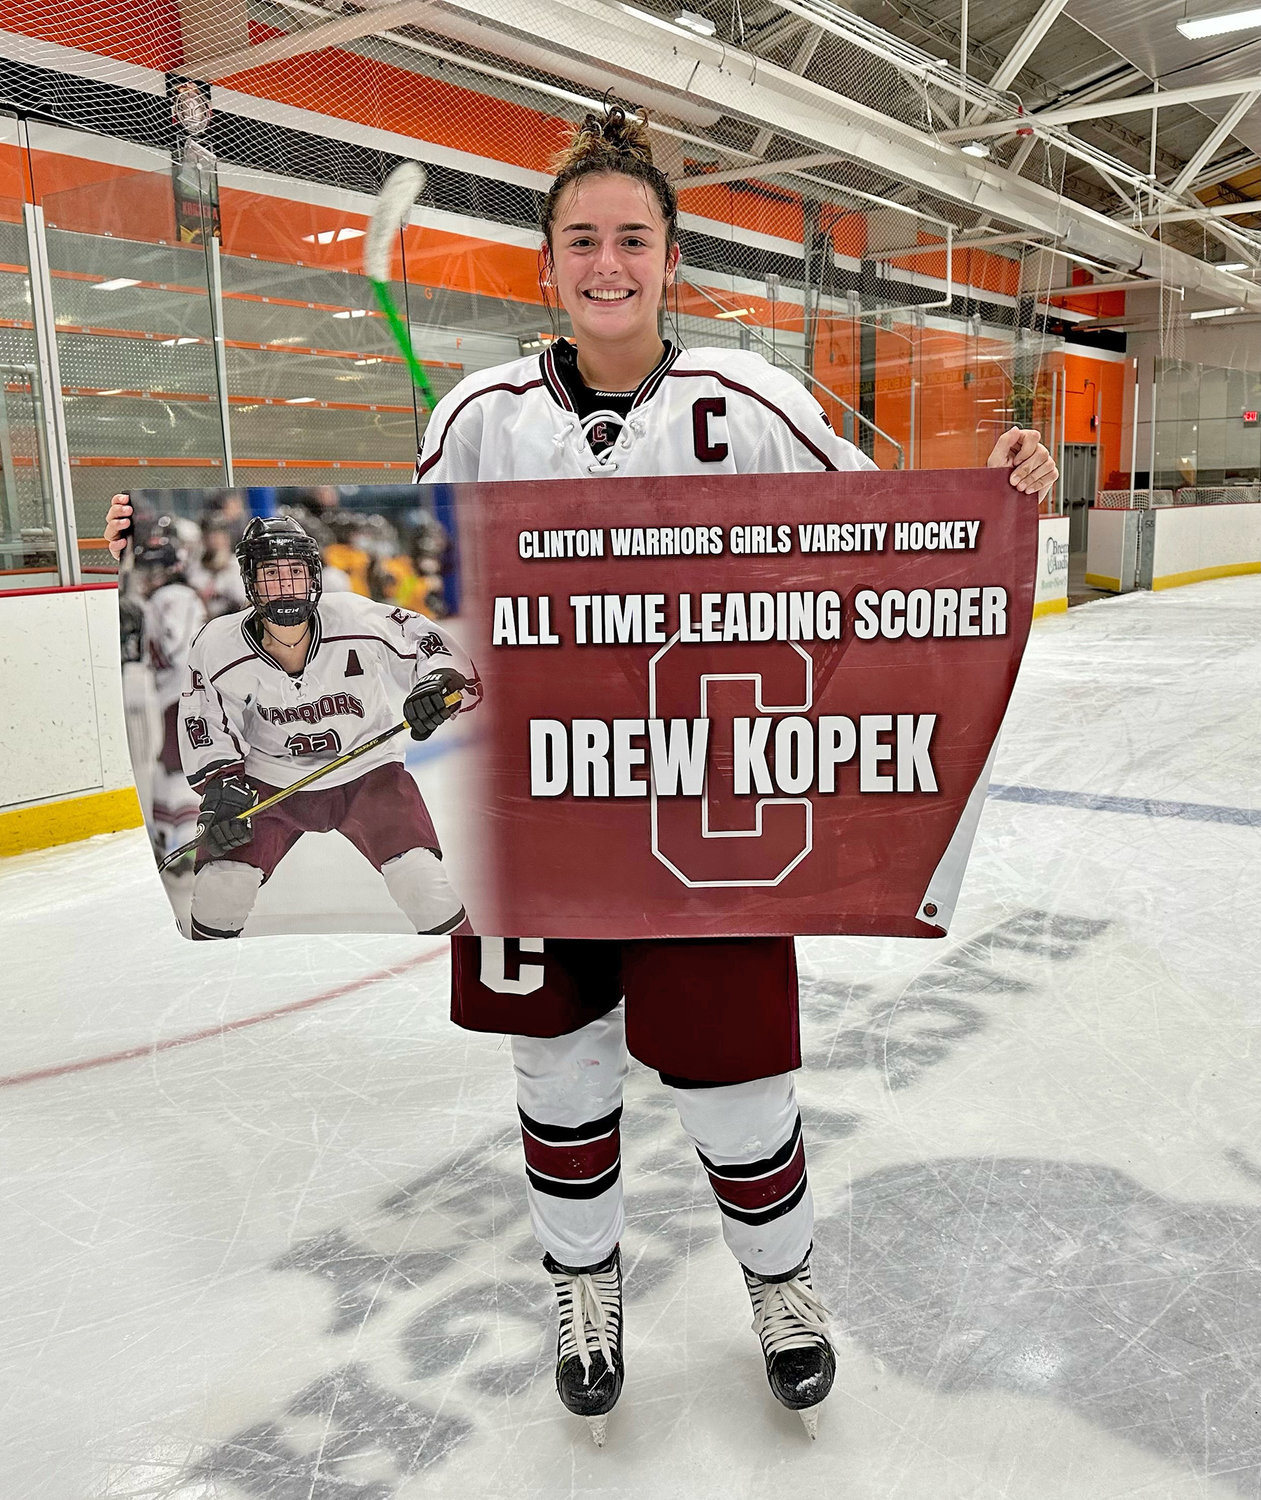 Senior forward Drew Kopek became the all-time leading scorer in Clinton girls ice hockey program history Friday when she passed Mia Lopata (71 points). She scored four times and had an assist in the team’s 8-0 win at home over Alexandria Bay. Kopek attends Rome Free Academy and plays for the unified team.